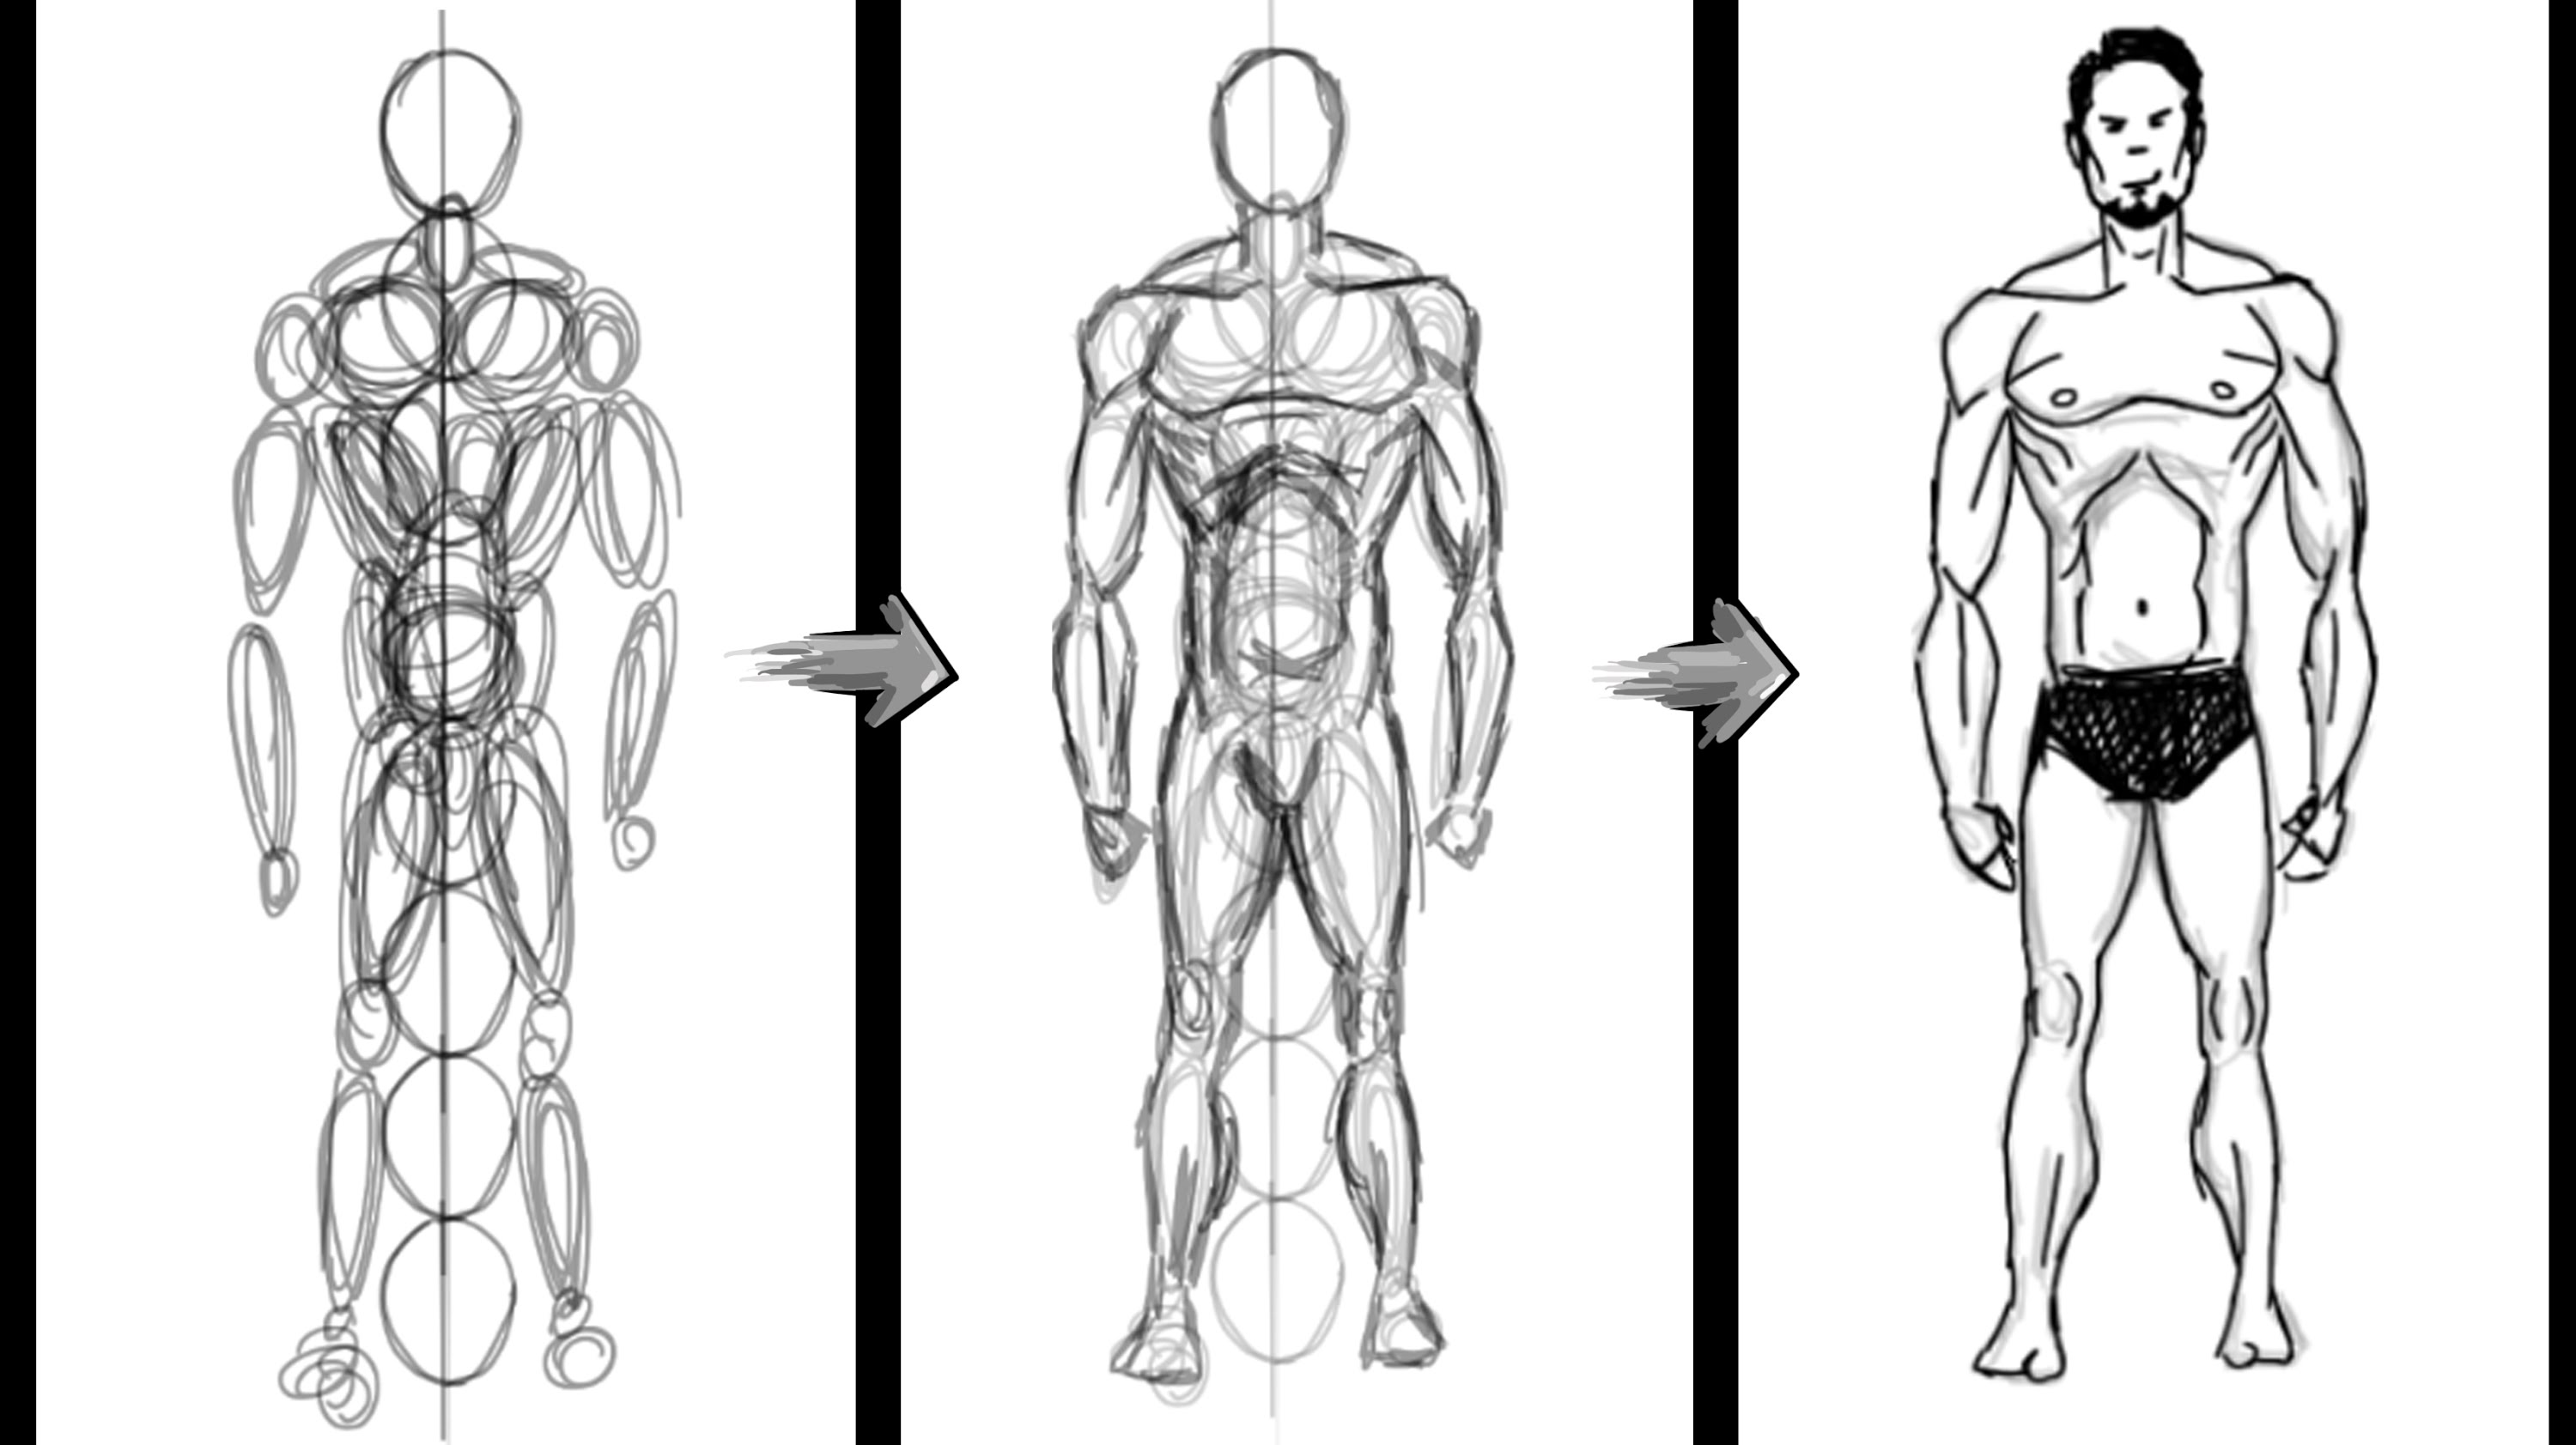 How to draw a basic Human Figure Using Circles Only - Photoshop ...